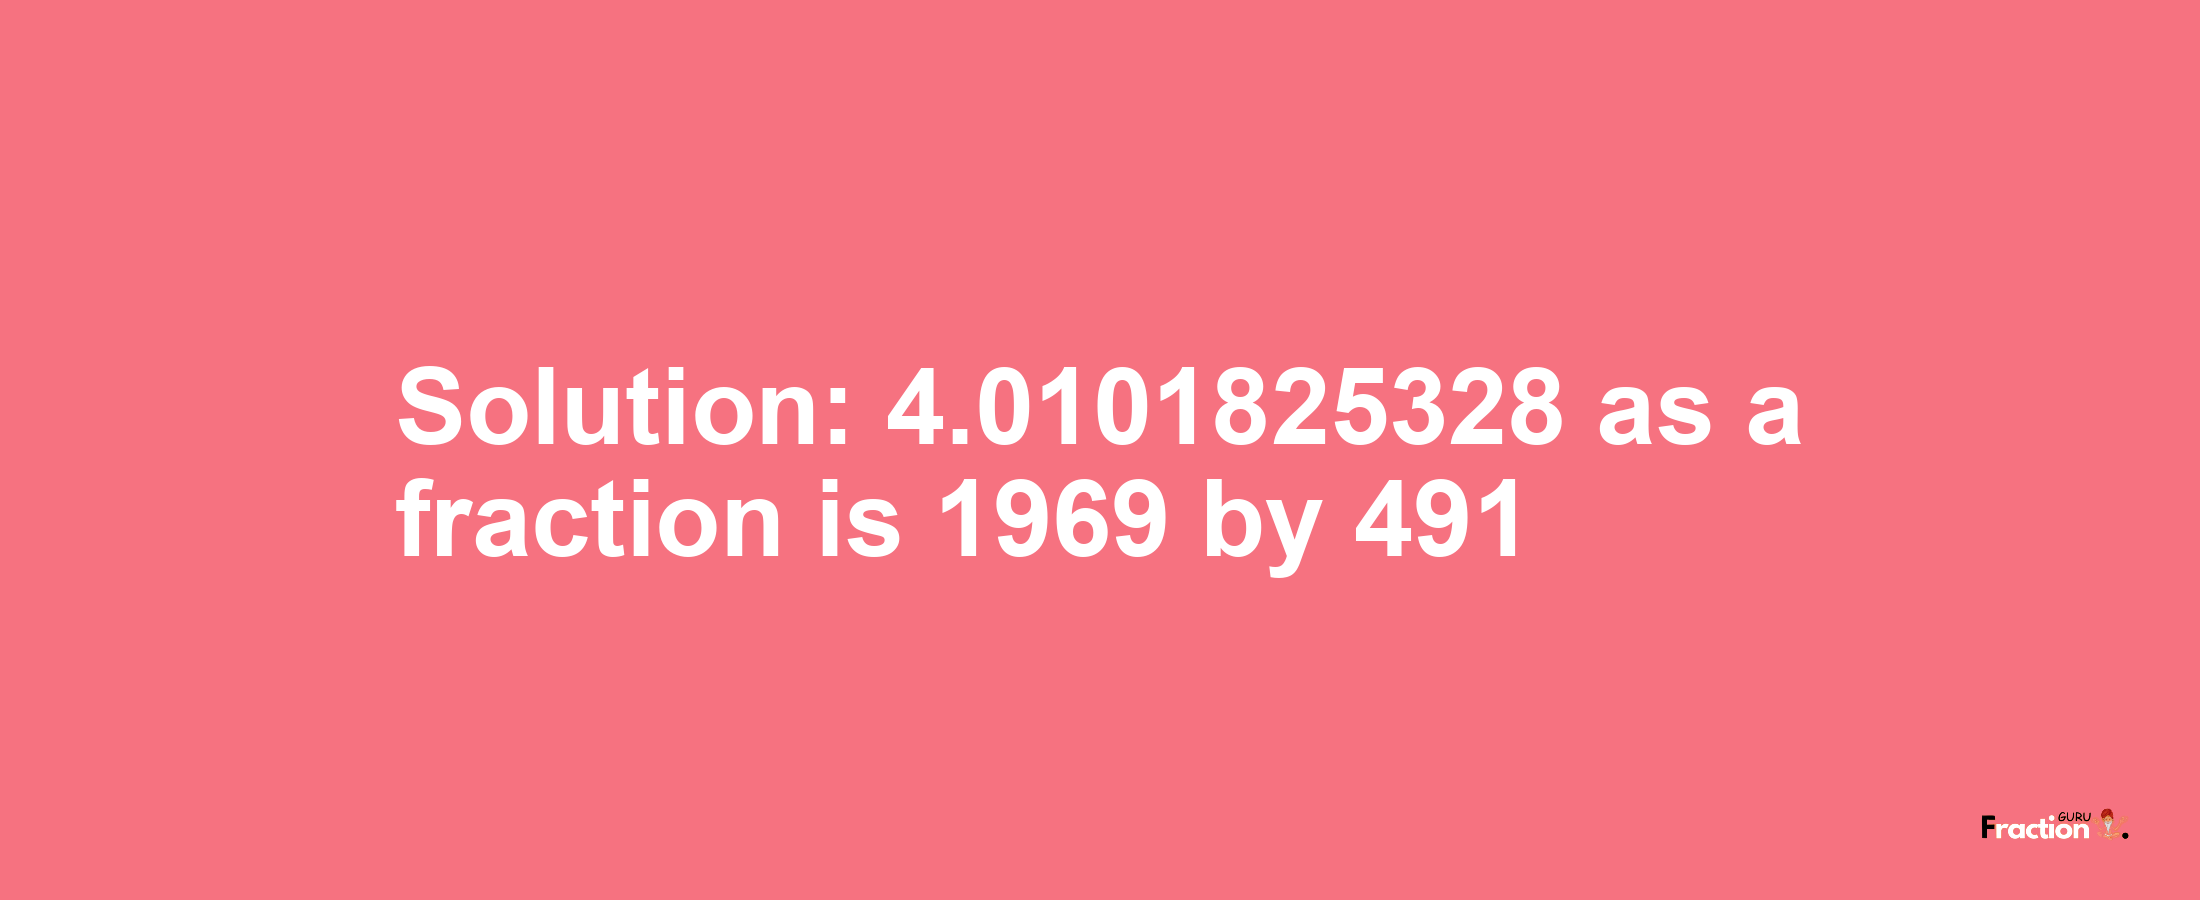 Solution:4.0101825328 as a fraction is 1969/491